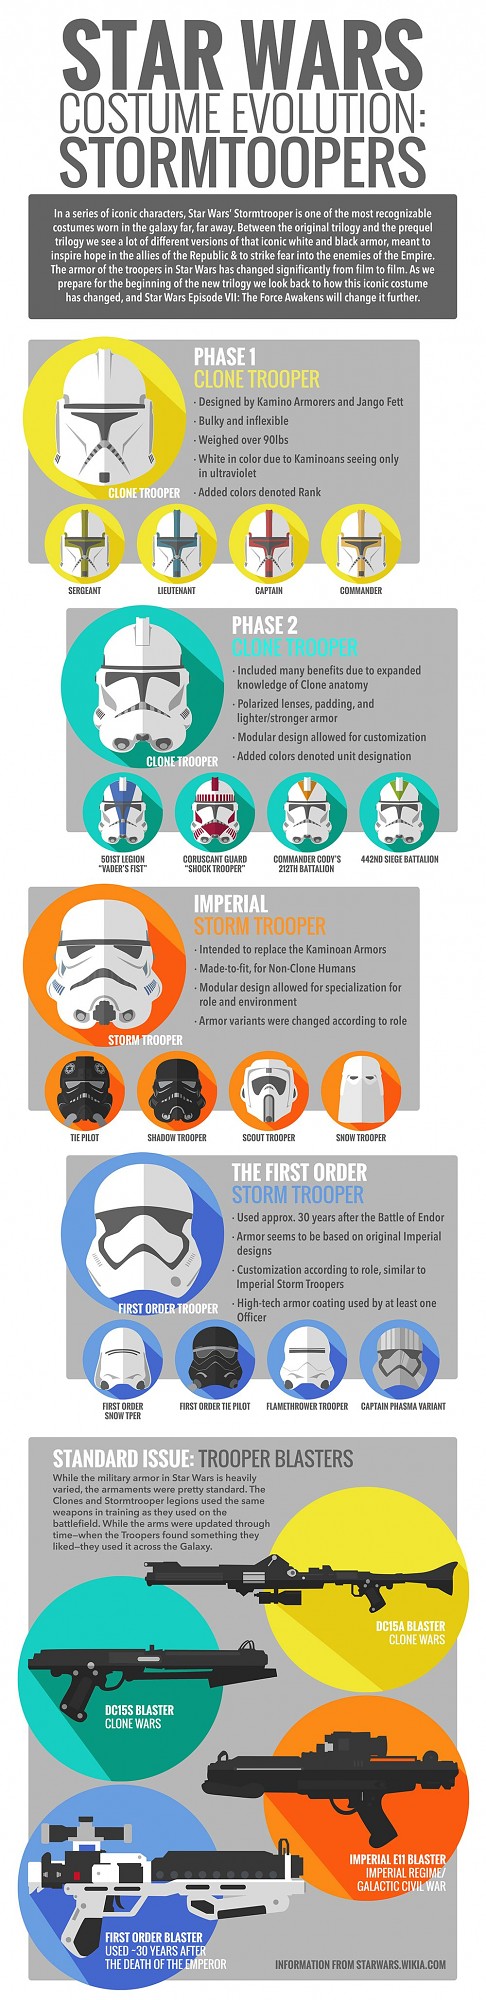 The Star Wars Costume Evolution: Stormtroopers